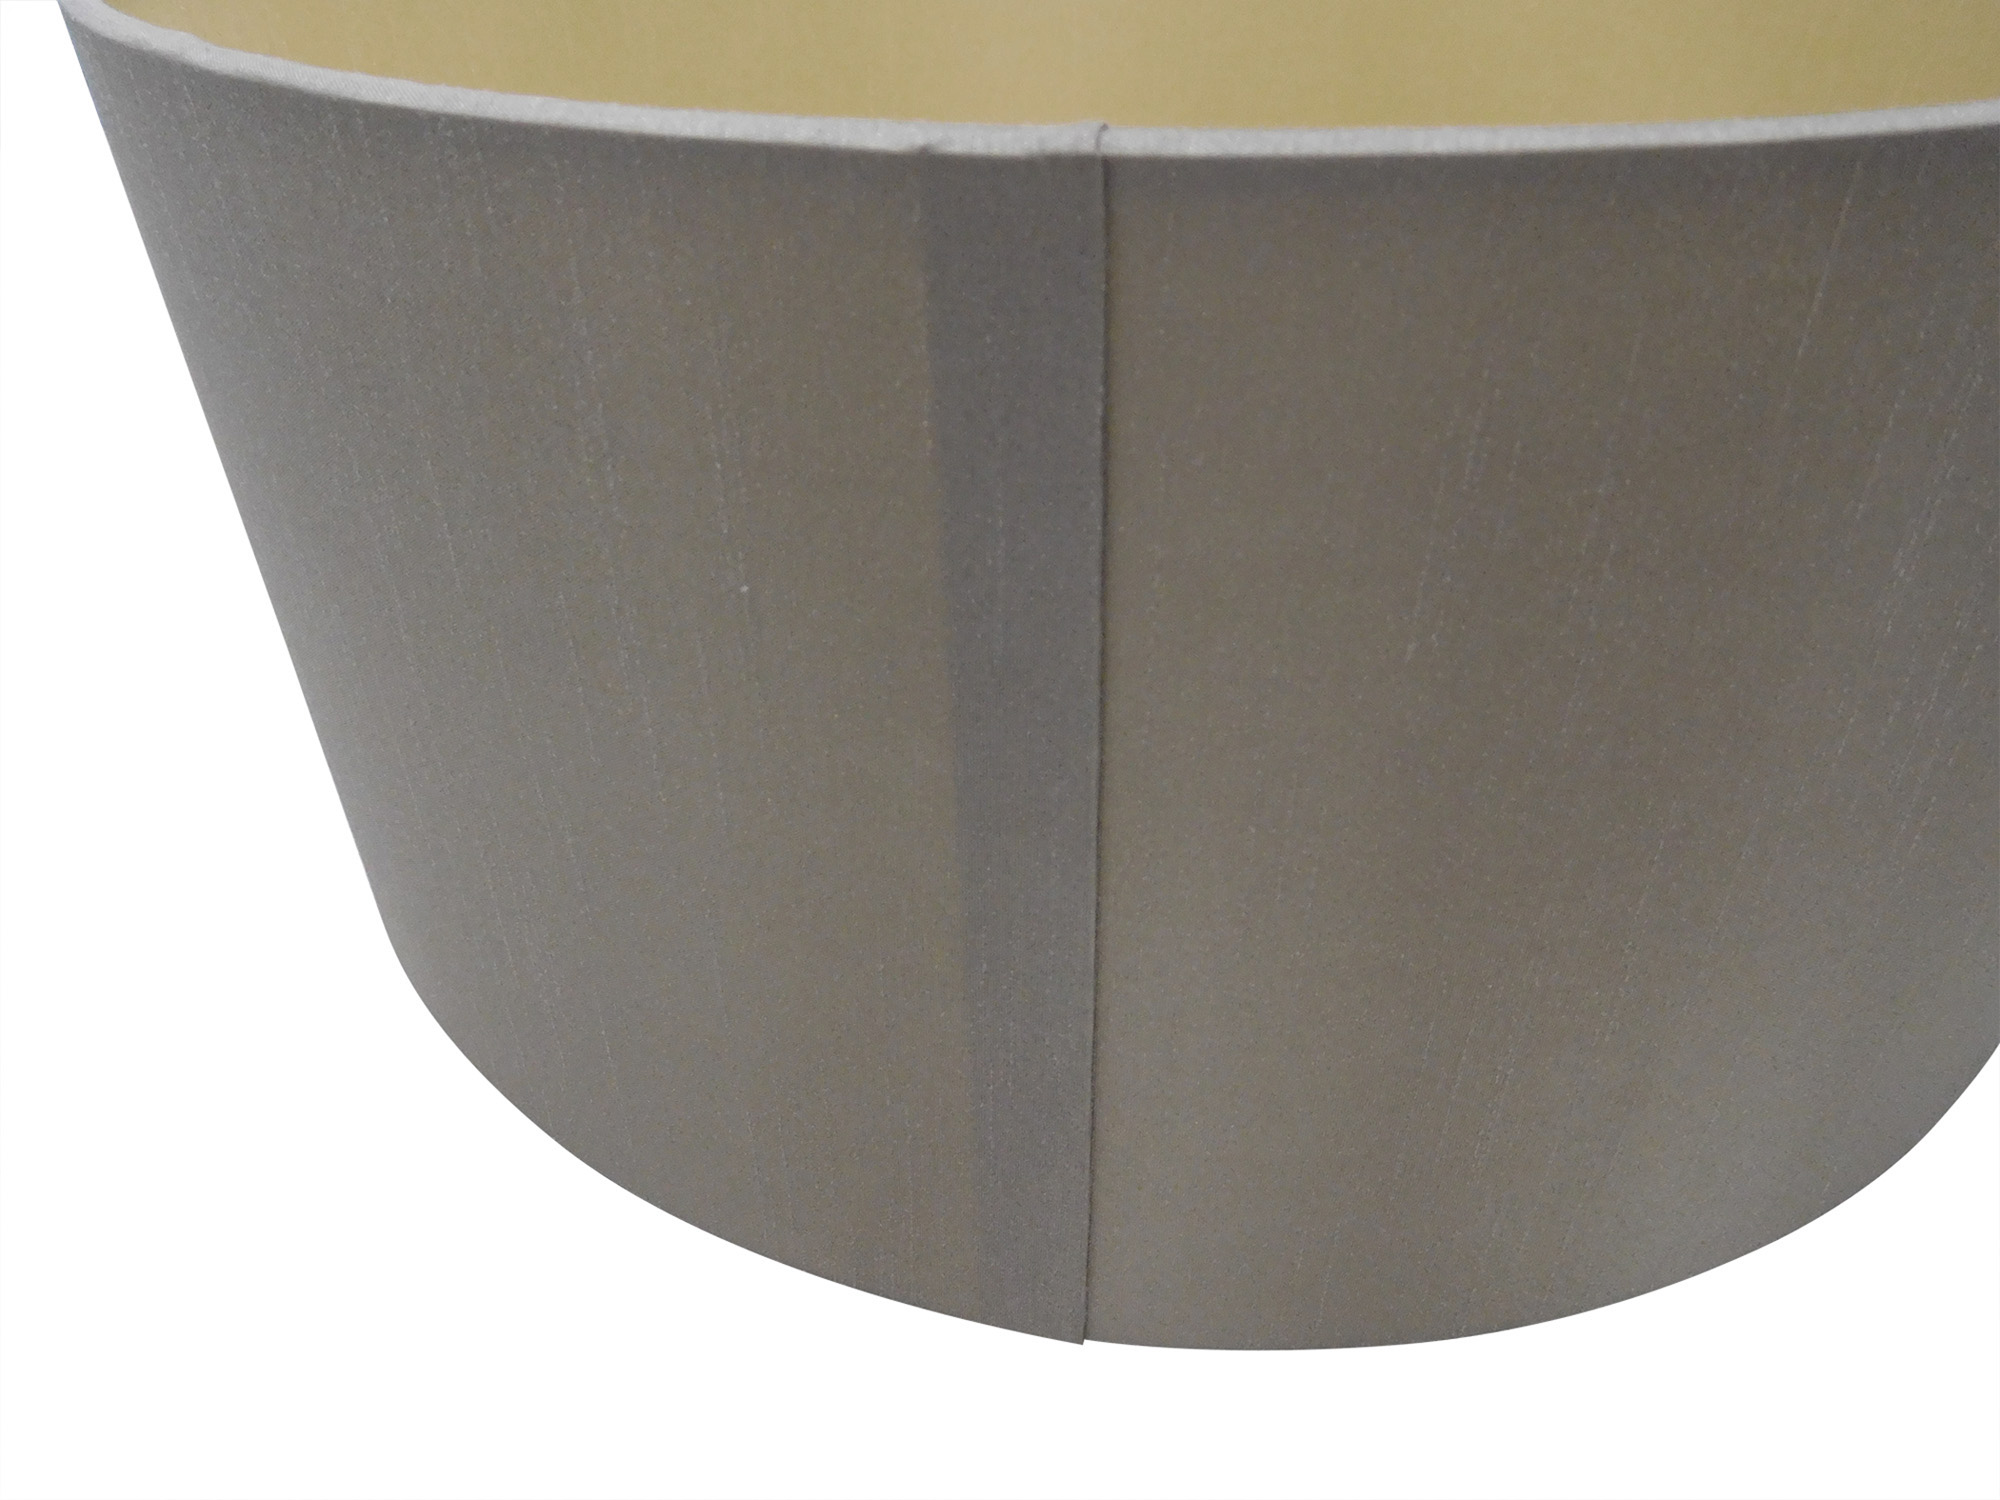 Baymont 50cm Flush 5 Light Taupe/Halo Gold; Frosted Diffuser DK0642  Deco Baymont WH TA